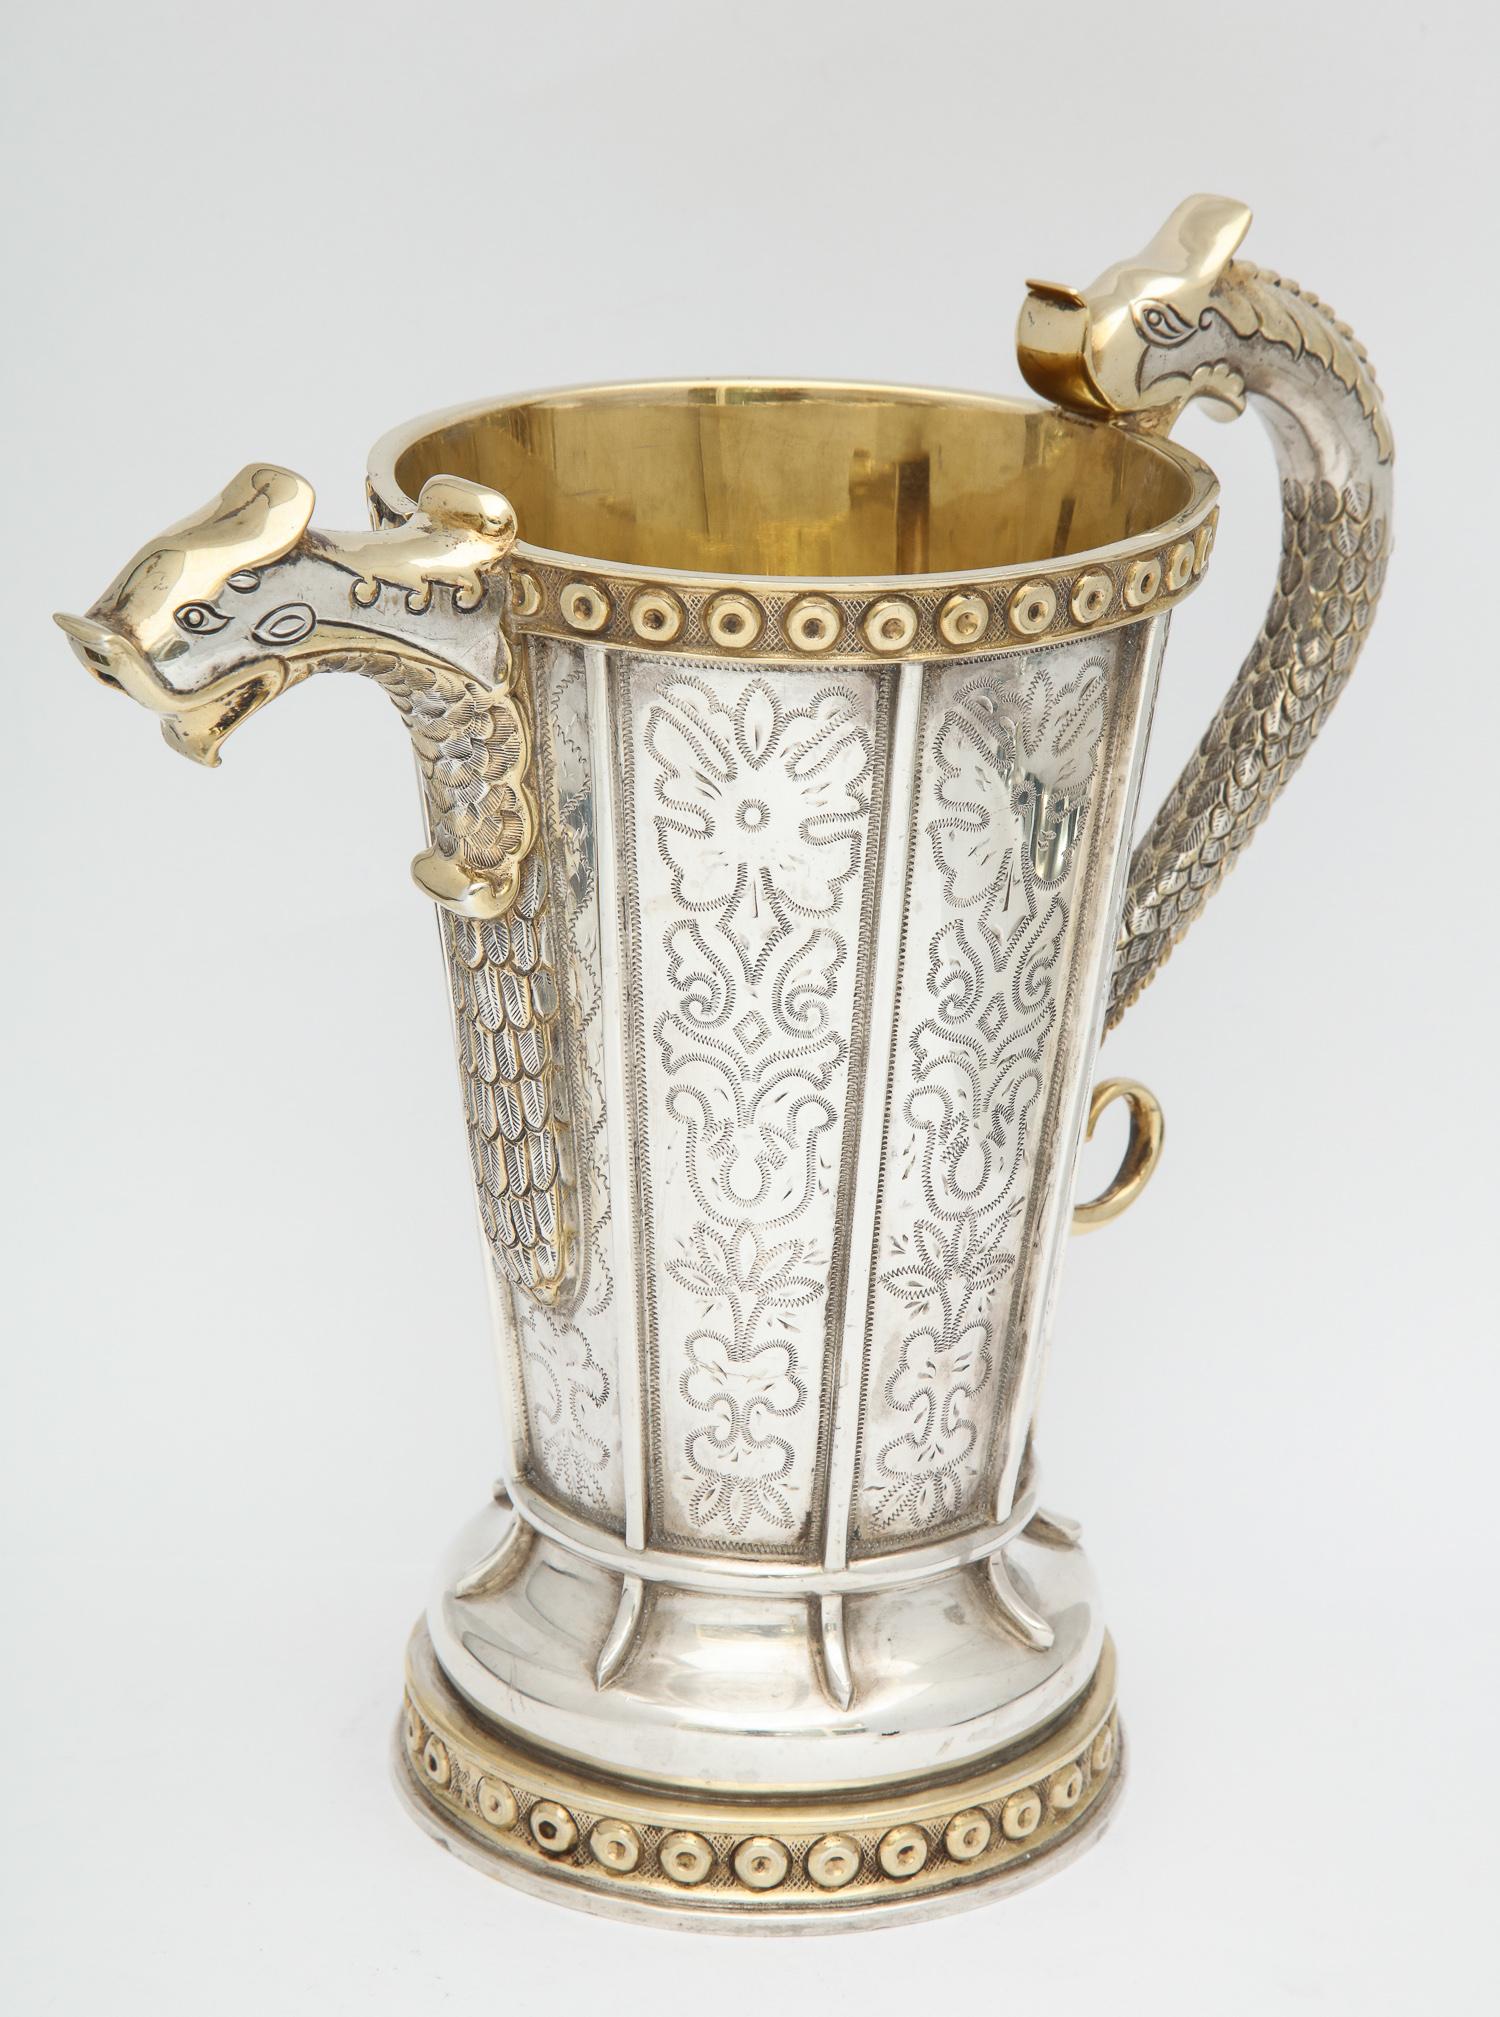 Quetzalcoatl-Inspired Sterling Silver Gilt Pitcher by Tane 1